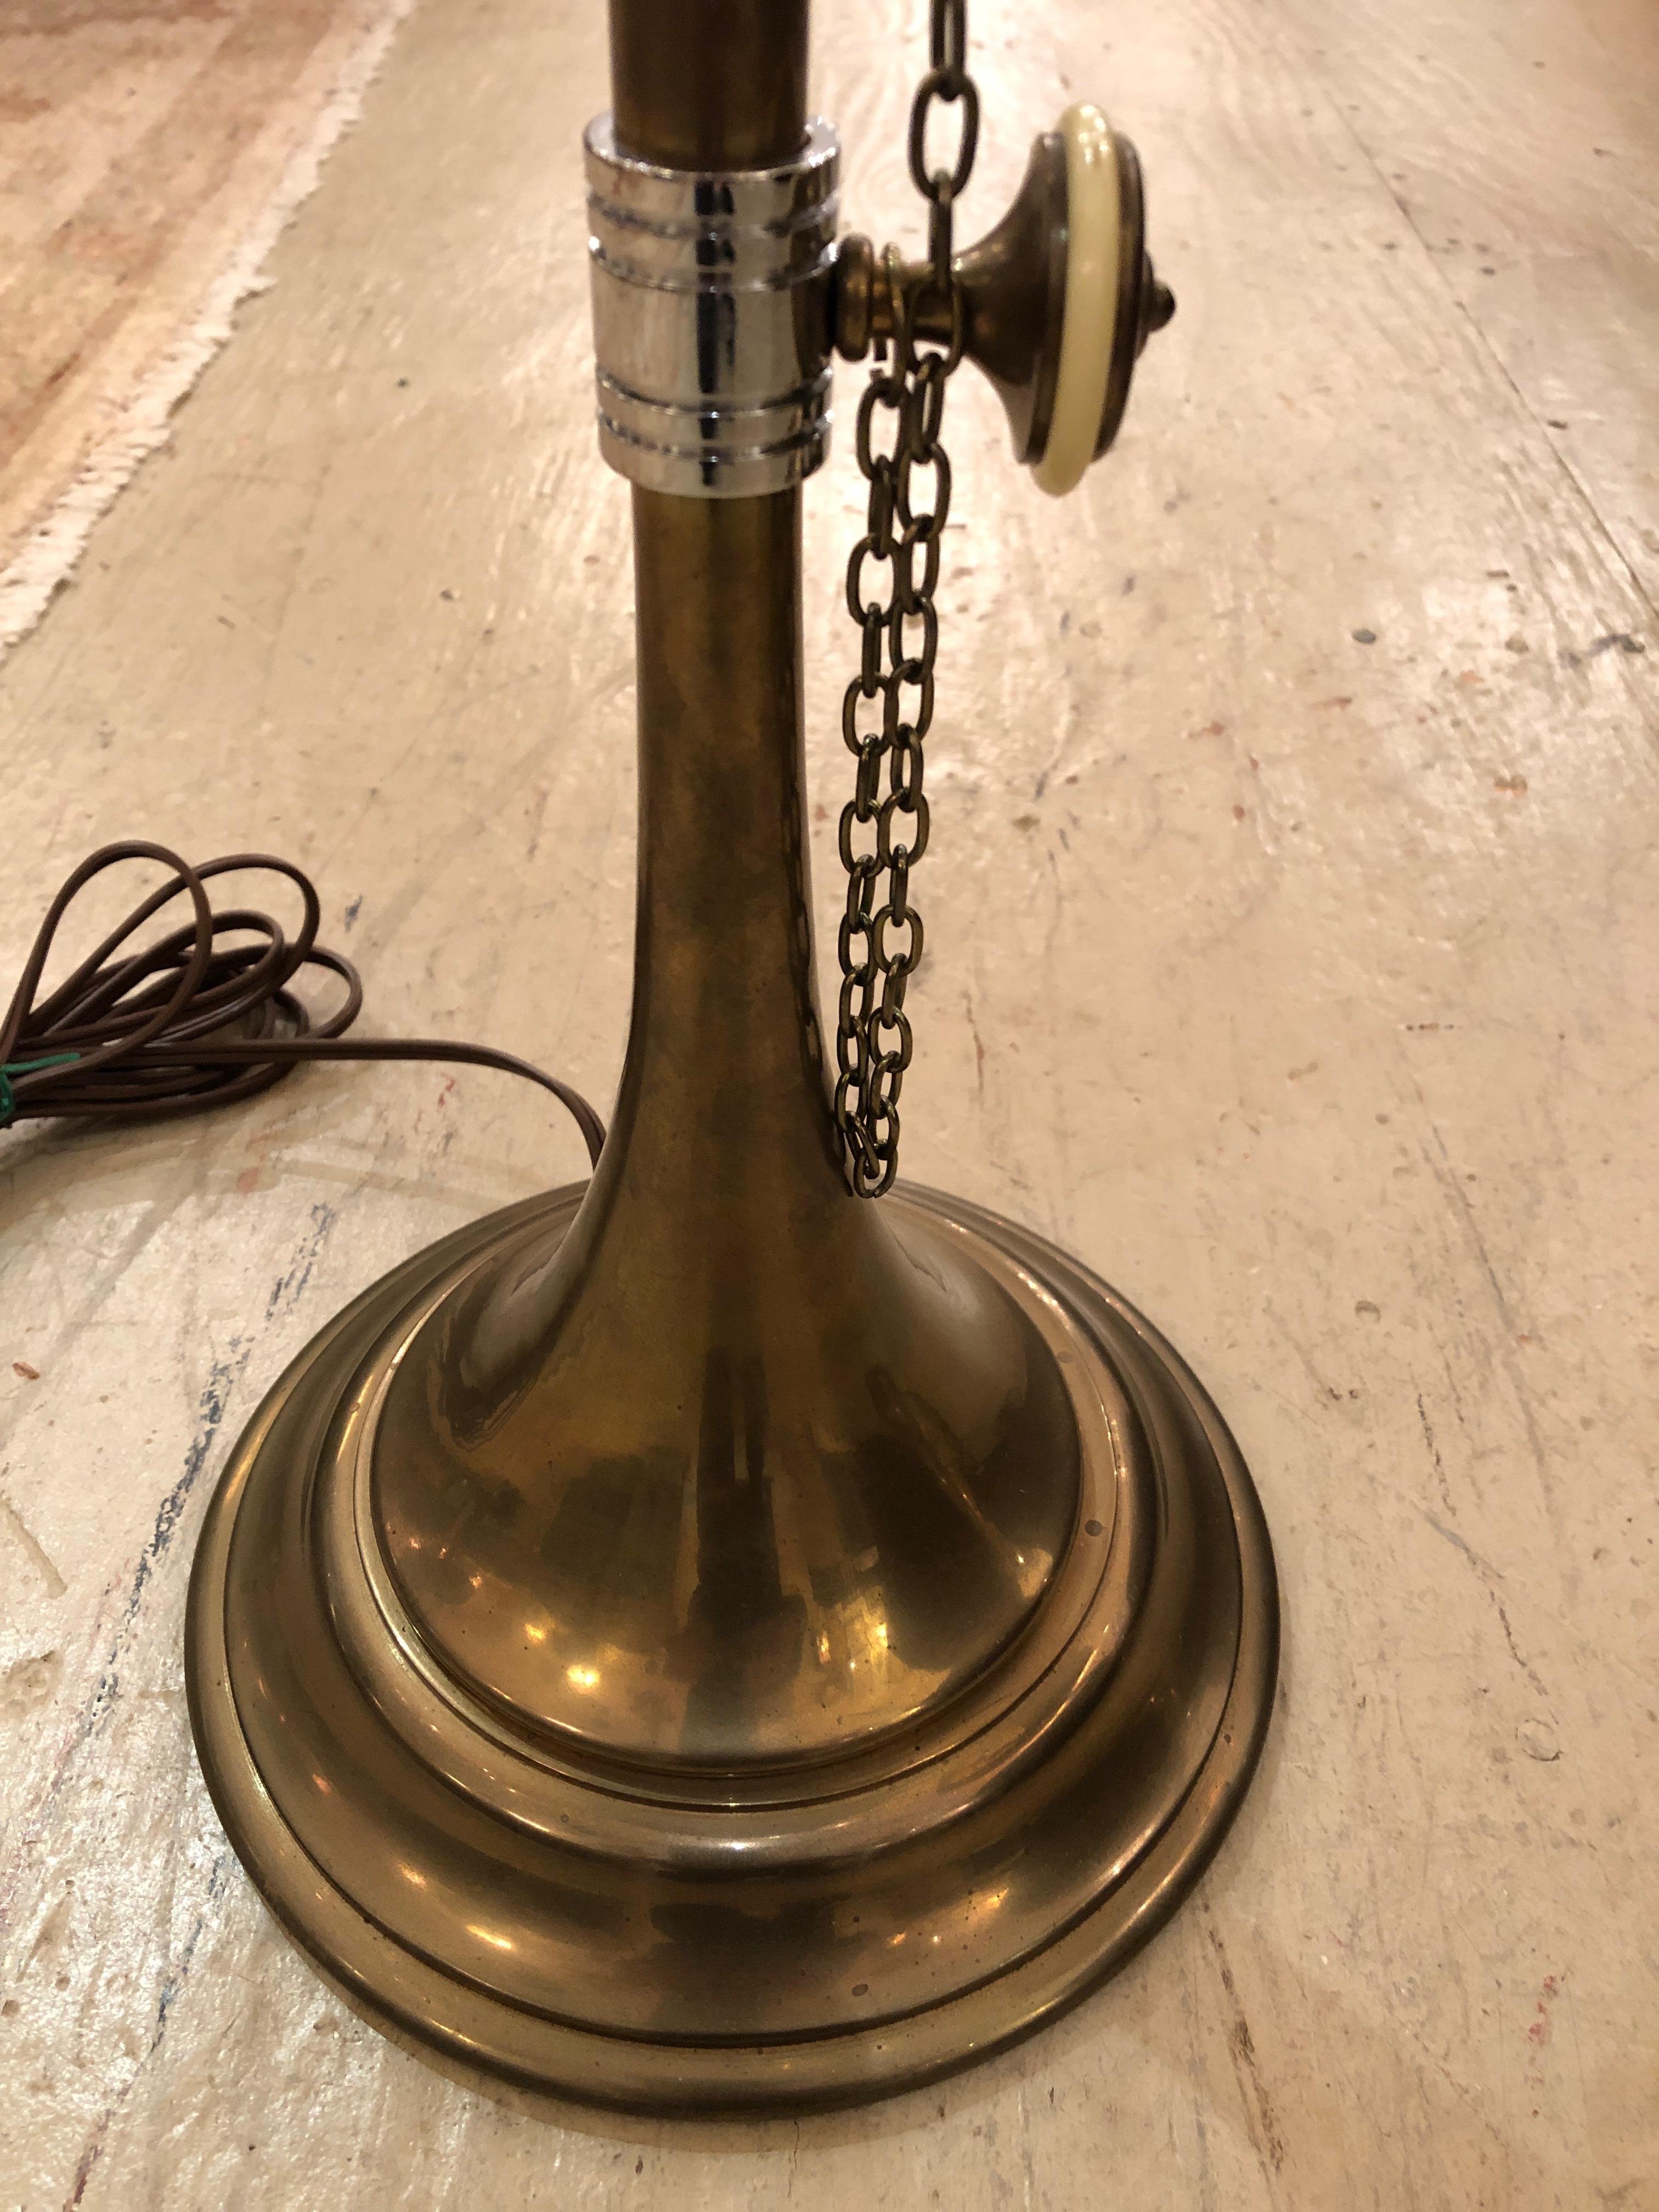 A wonderful elongated pair of brass table lamps inspired by musical horns having white enamel knobs, decorative chains, as well as handsome green shades lined in gold.